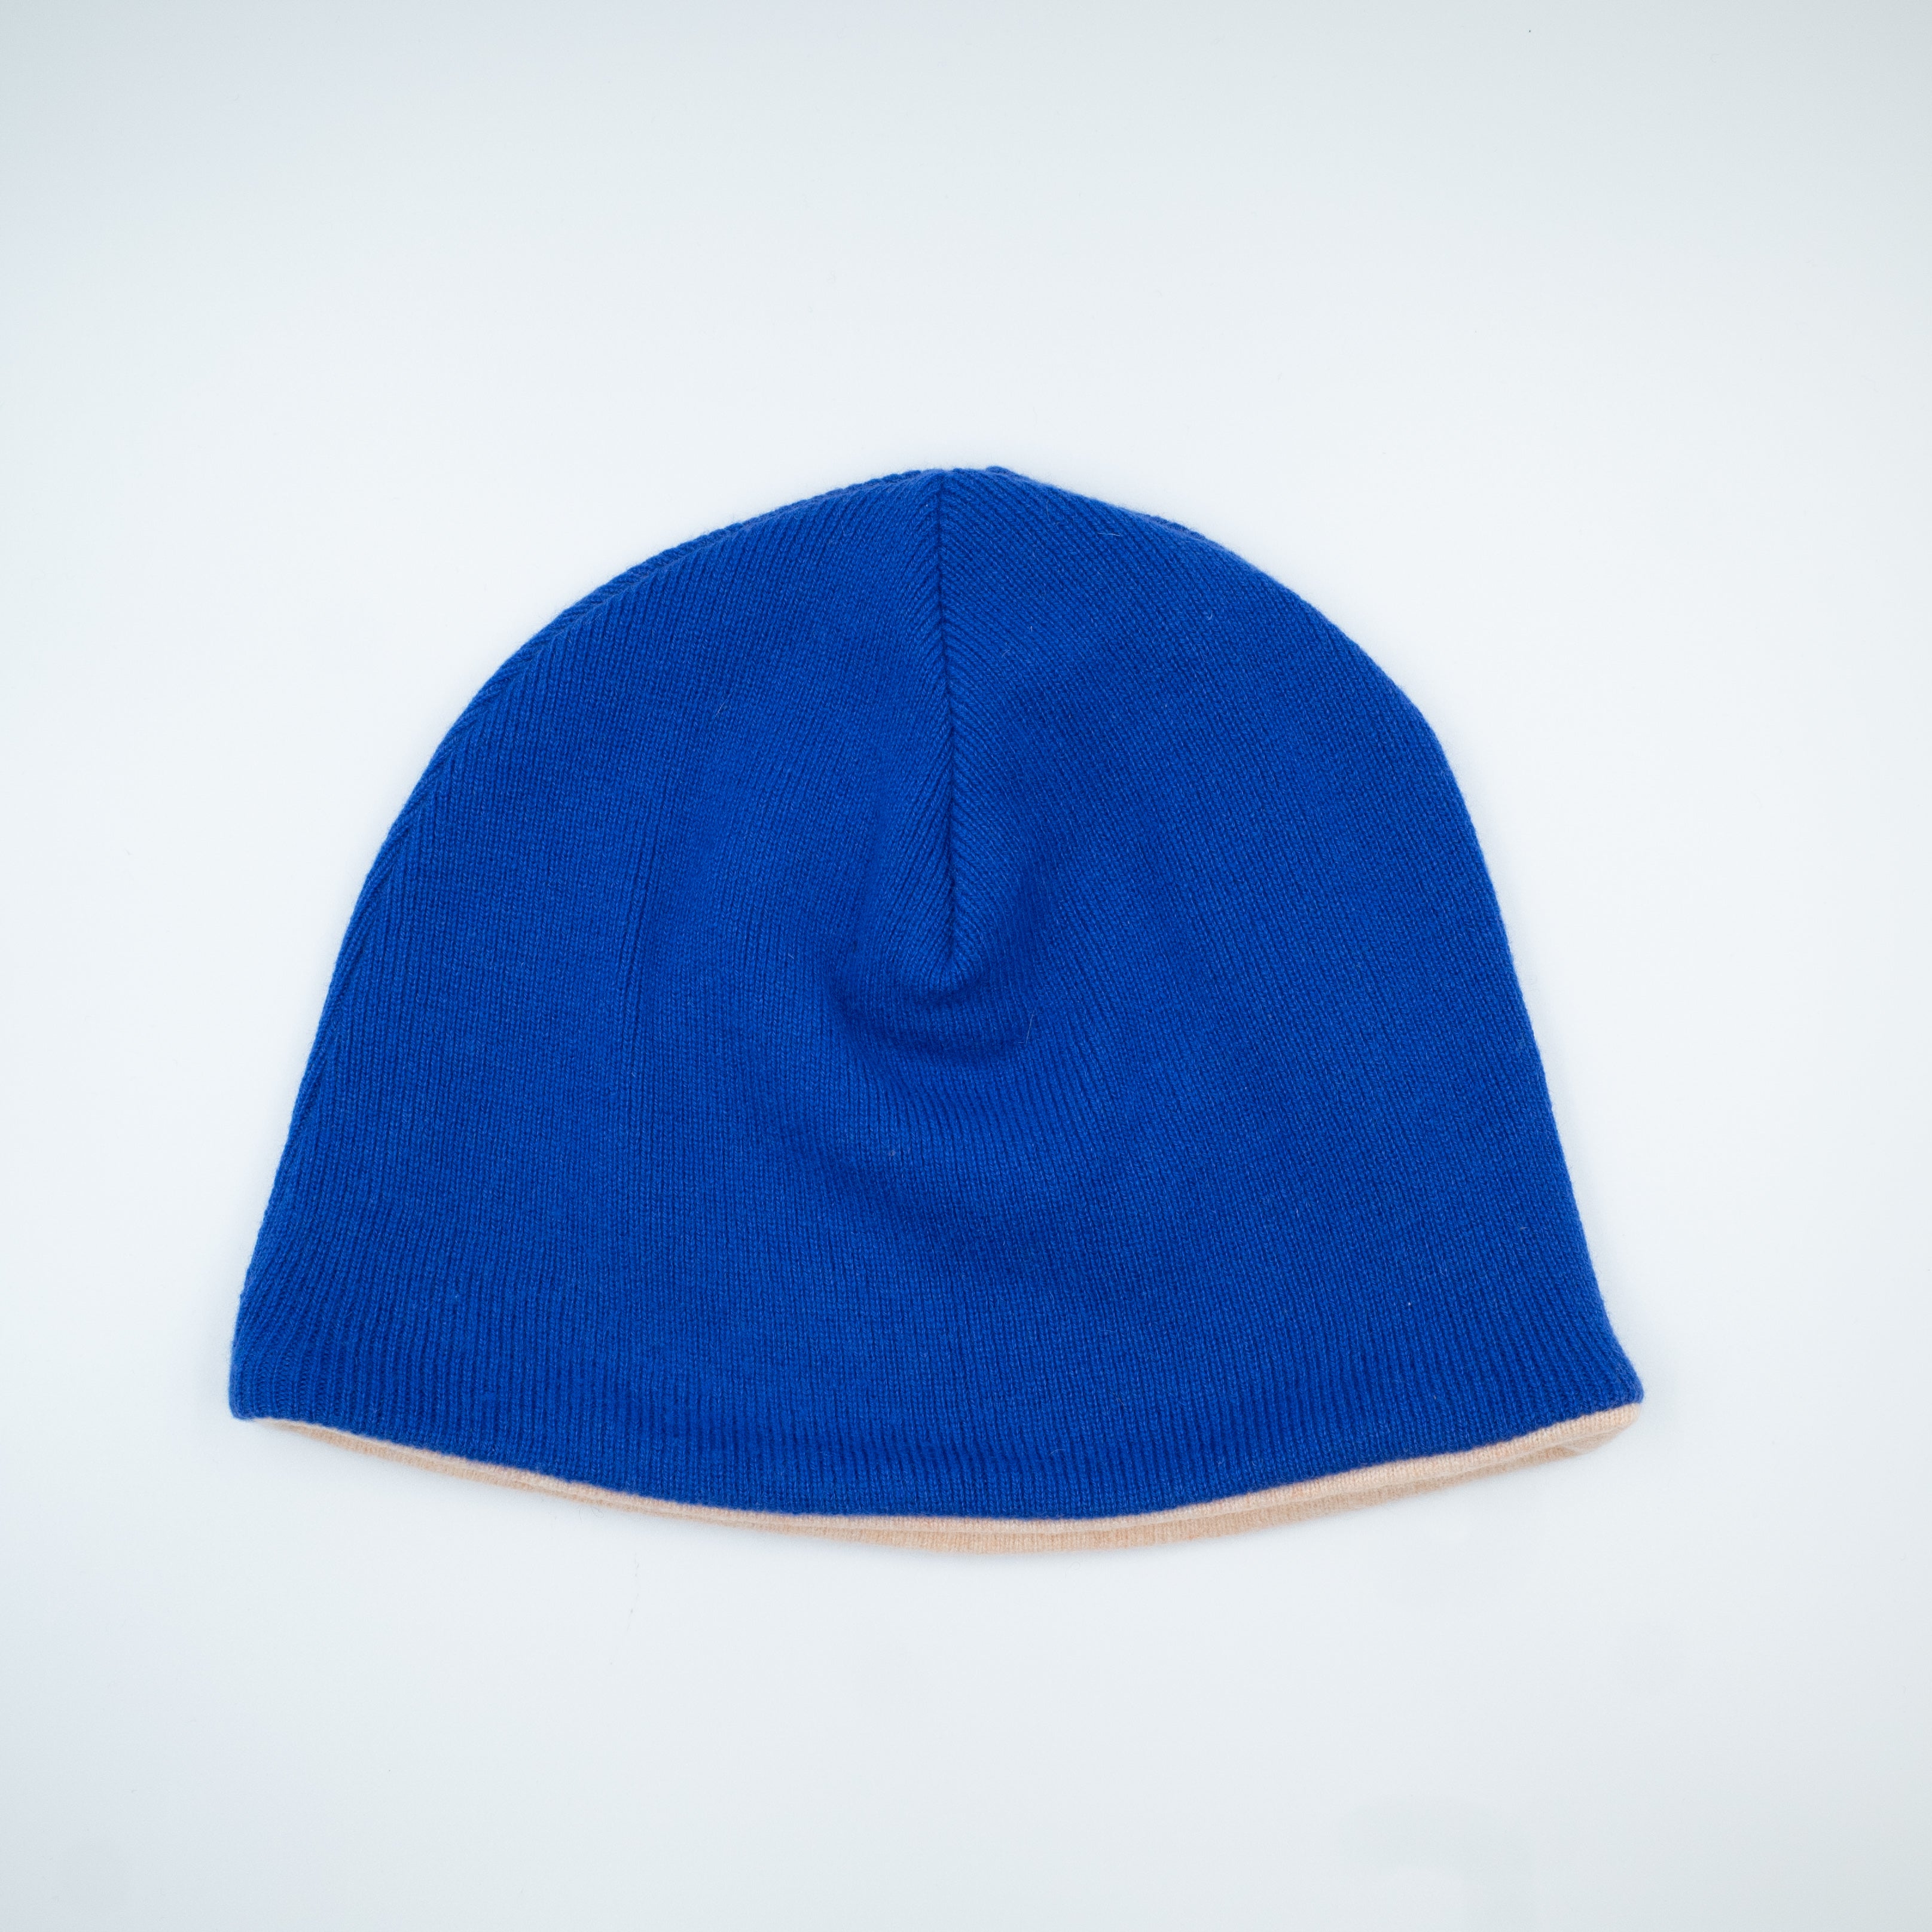 Admiral Blue and Pale Terracotta Cashmere Beanie Hat